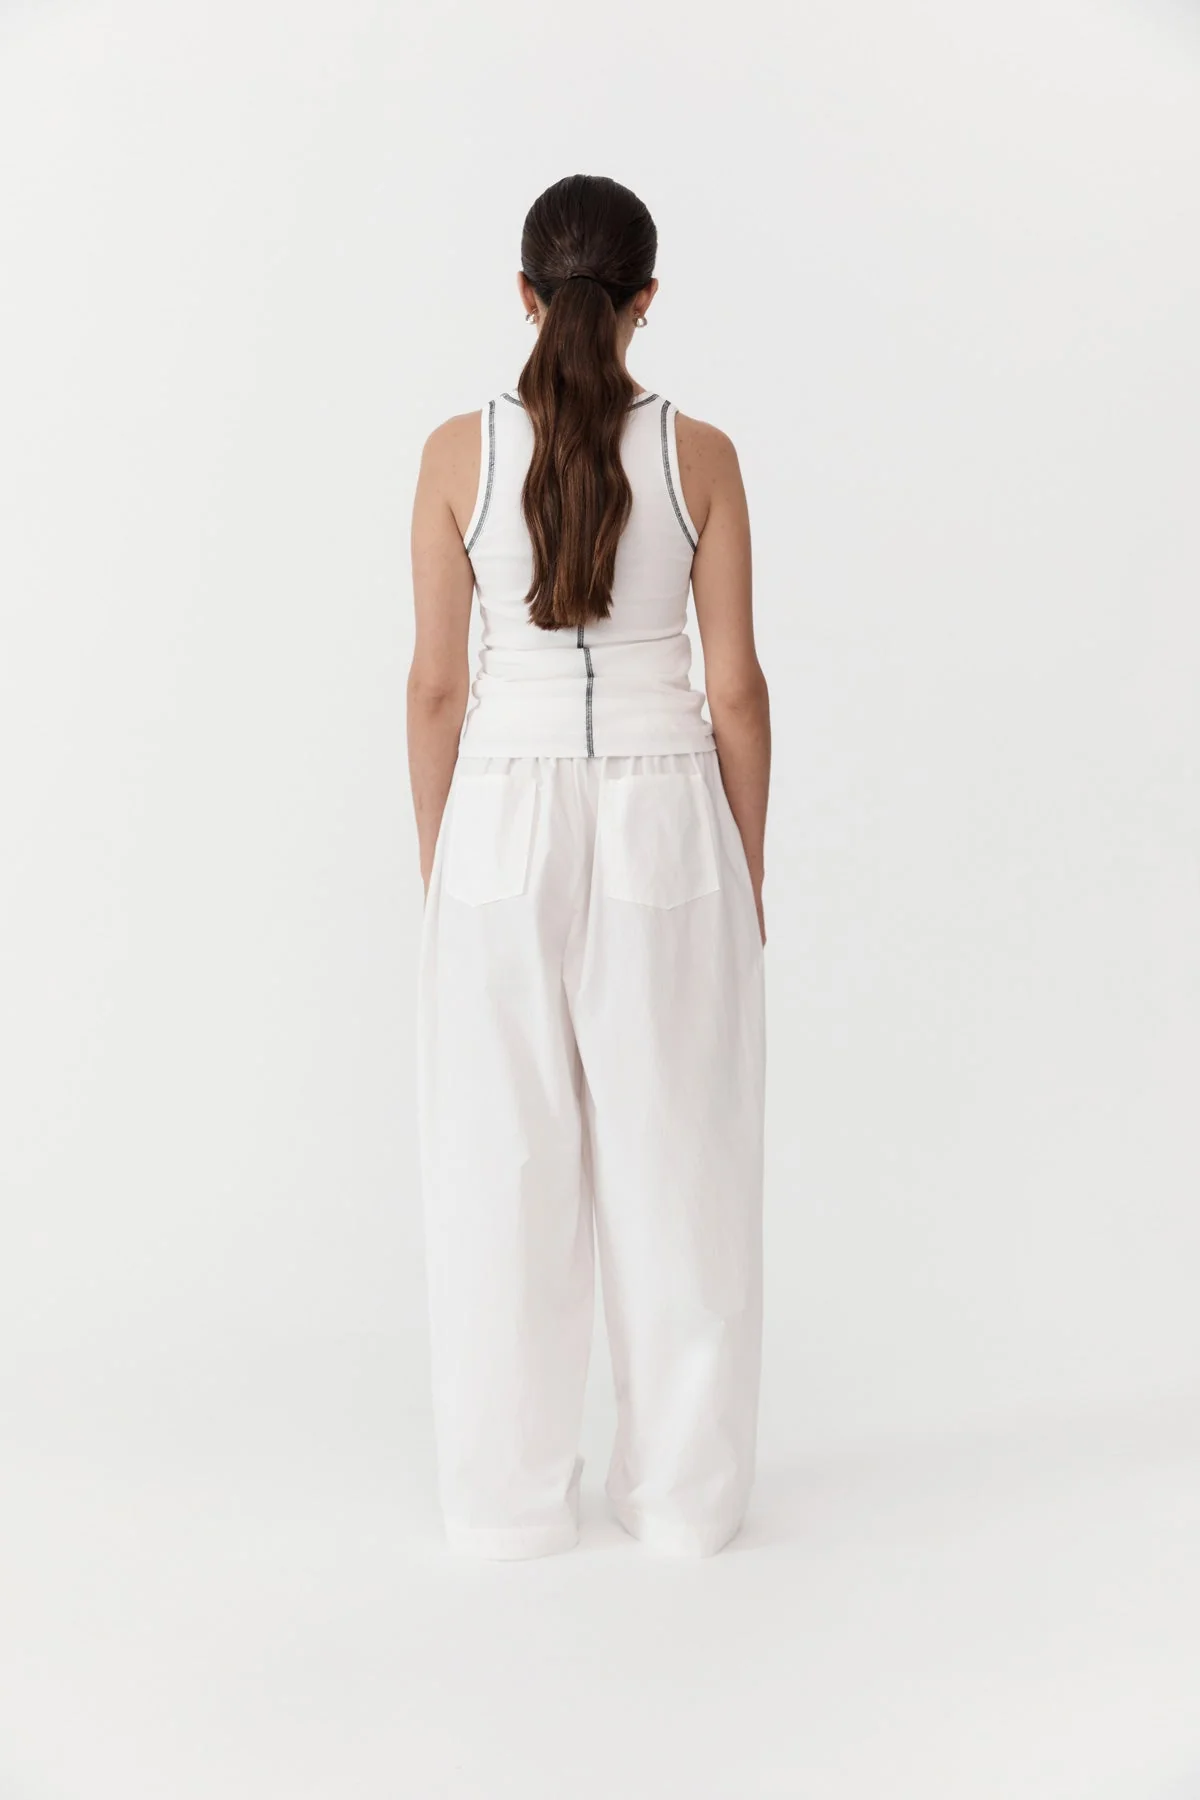 St Agni Relaxed Drawstring Pant in White available at The New Trend australia.